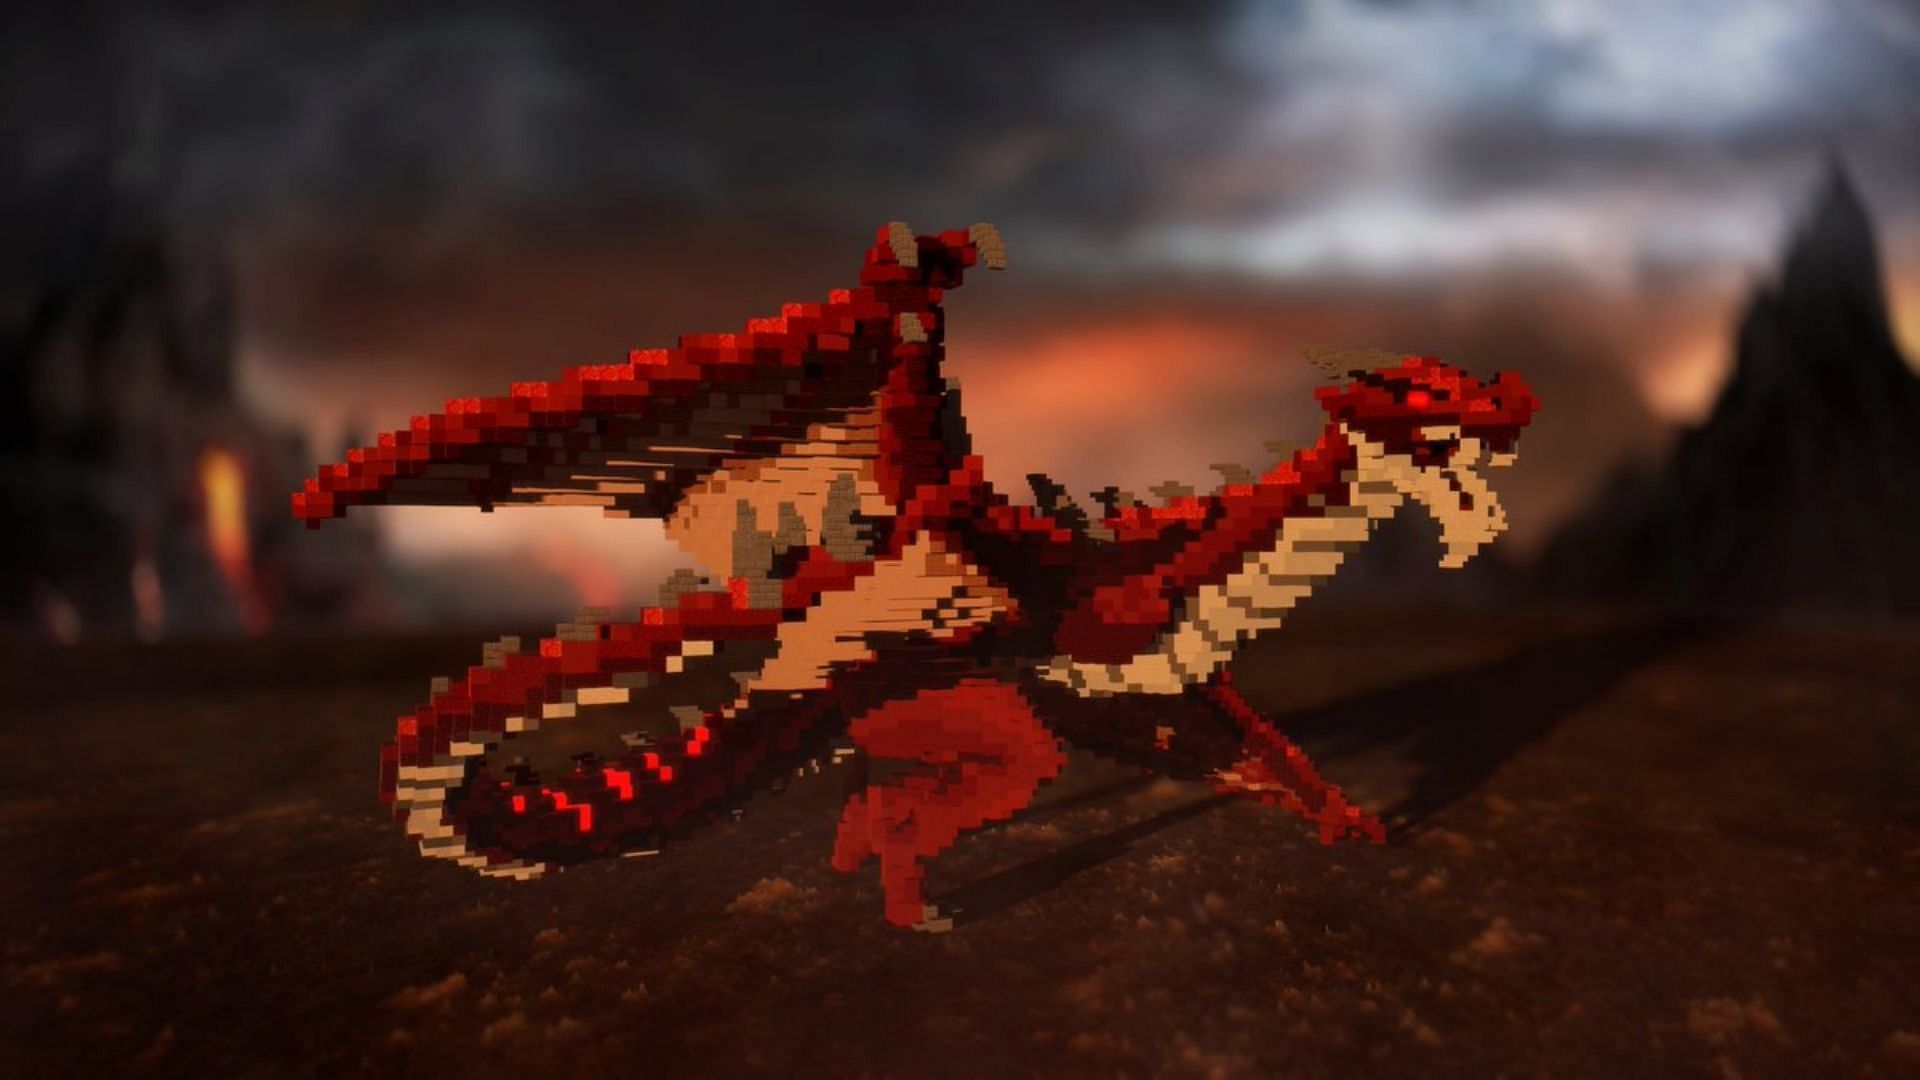 Red dragon was originally planned for Minecraft by Notch (Image via Twitter/@Khal_ester)